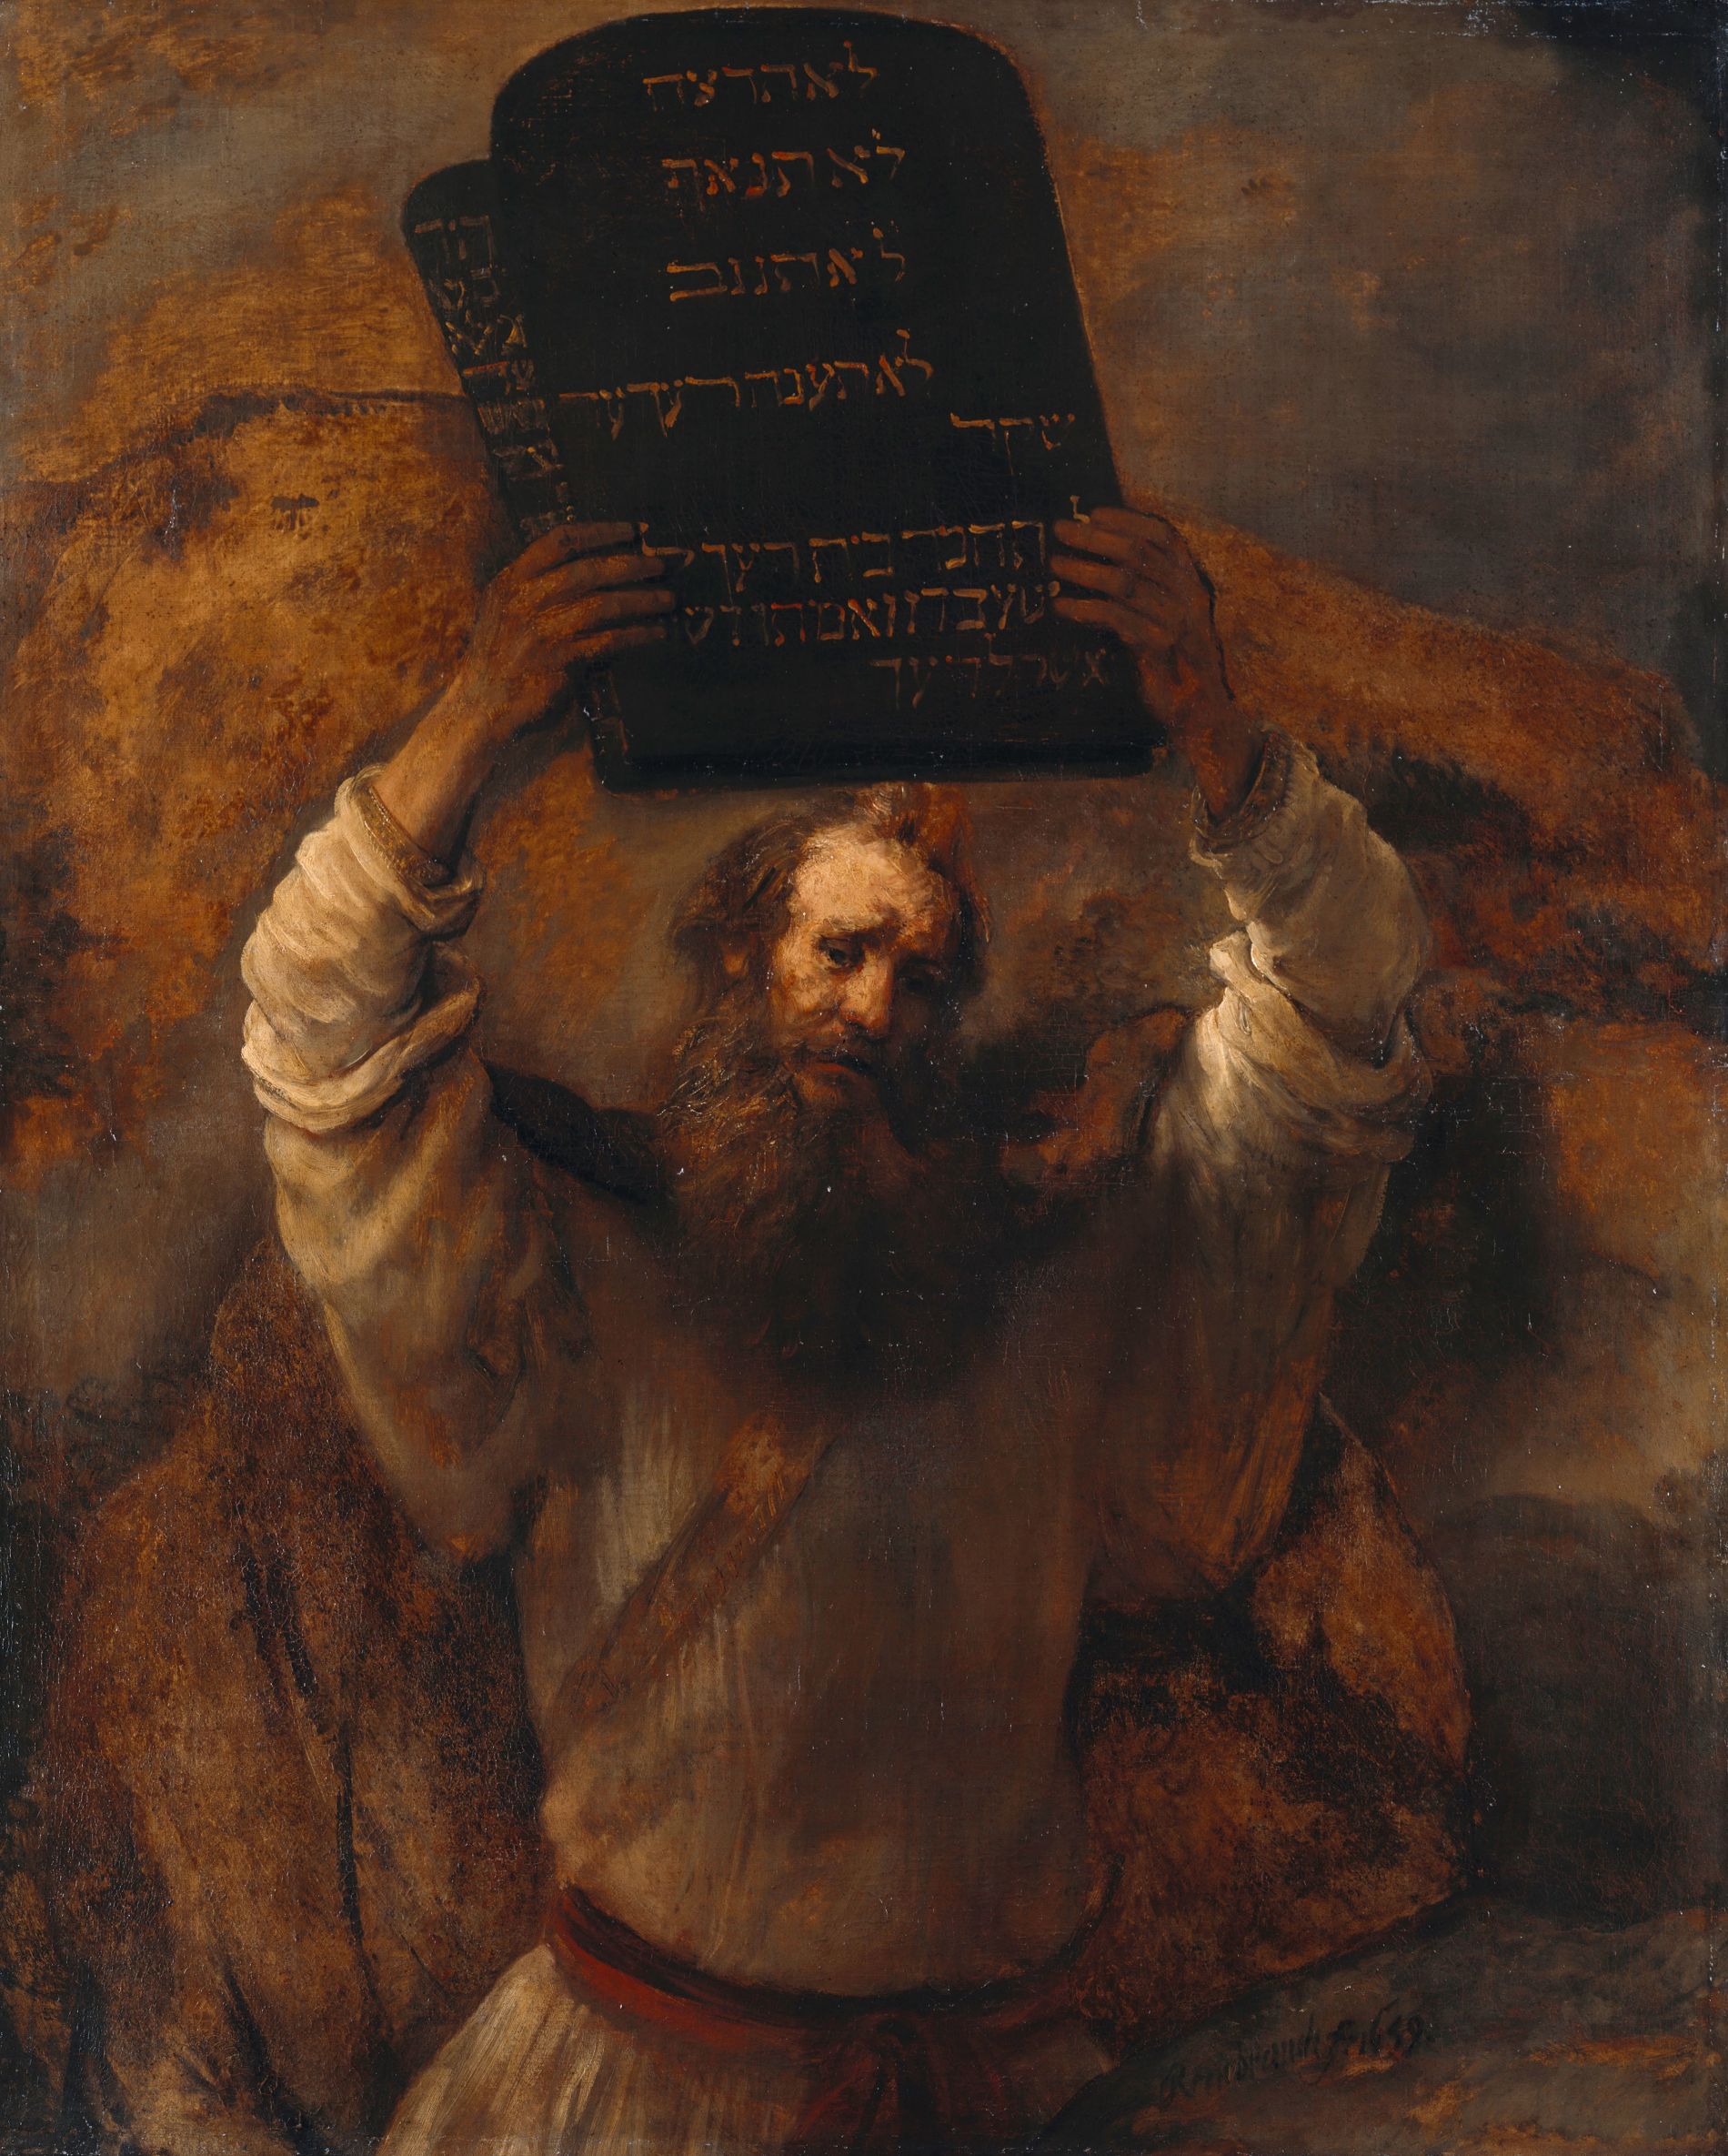 Moses with the Ten Commandments by Rembrandt via Wikimedia Commons